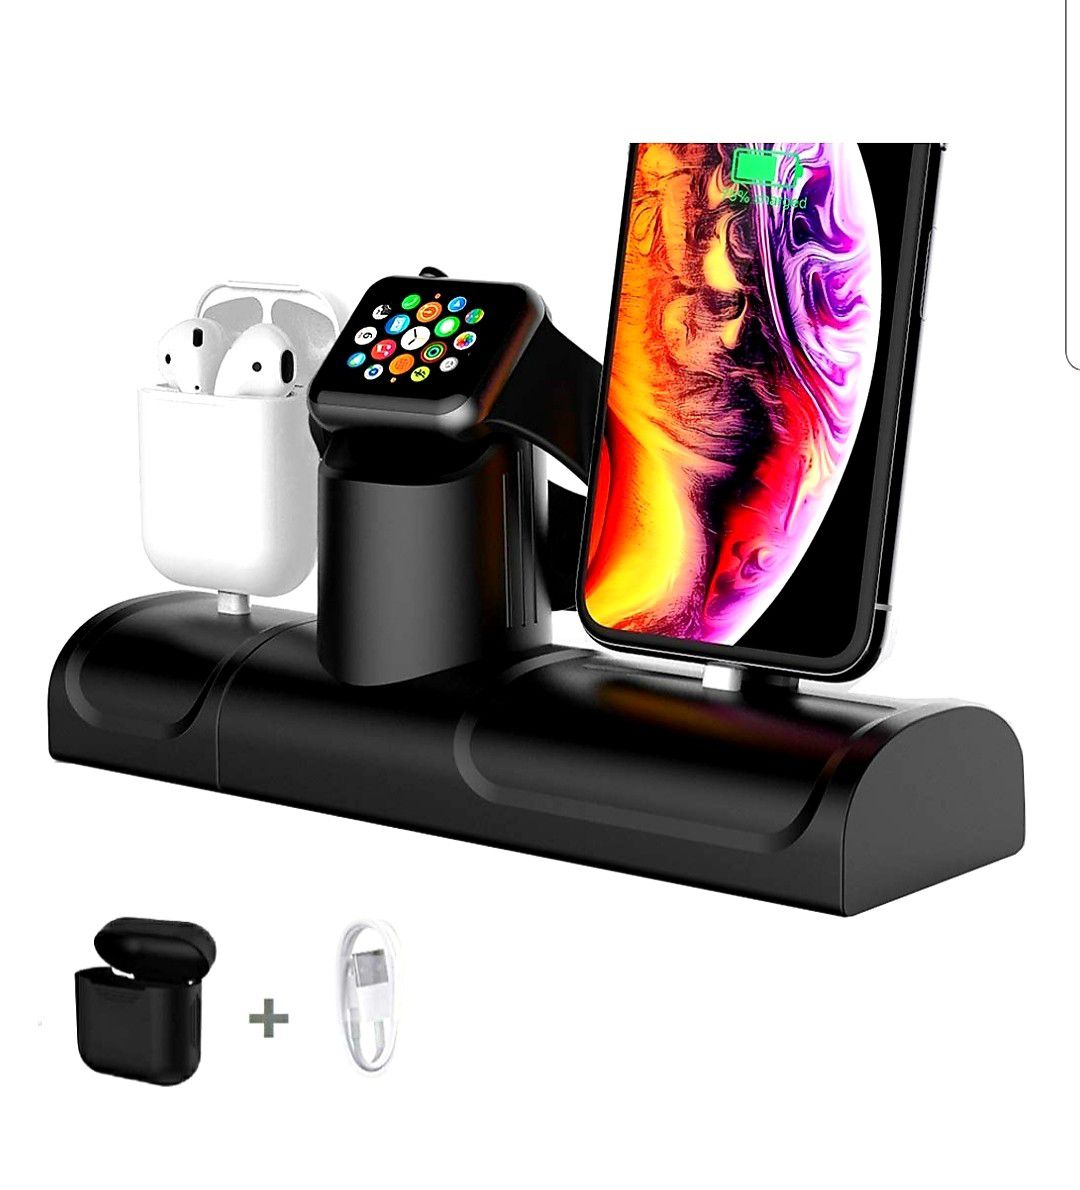 3 in 1 Charging Stand for Apple Watch iPhone AirPods Charger Holder Docking Station [Black] DEVICES NOT INCLUDED